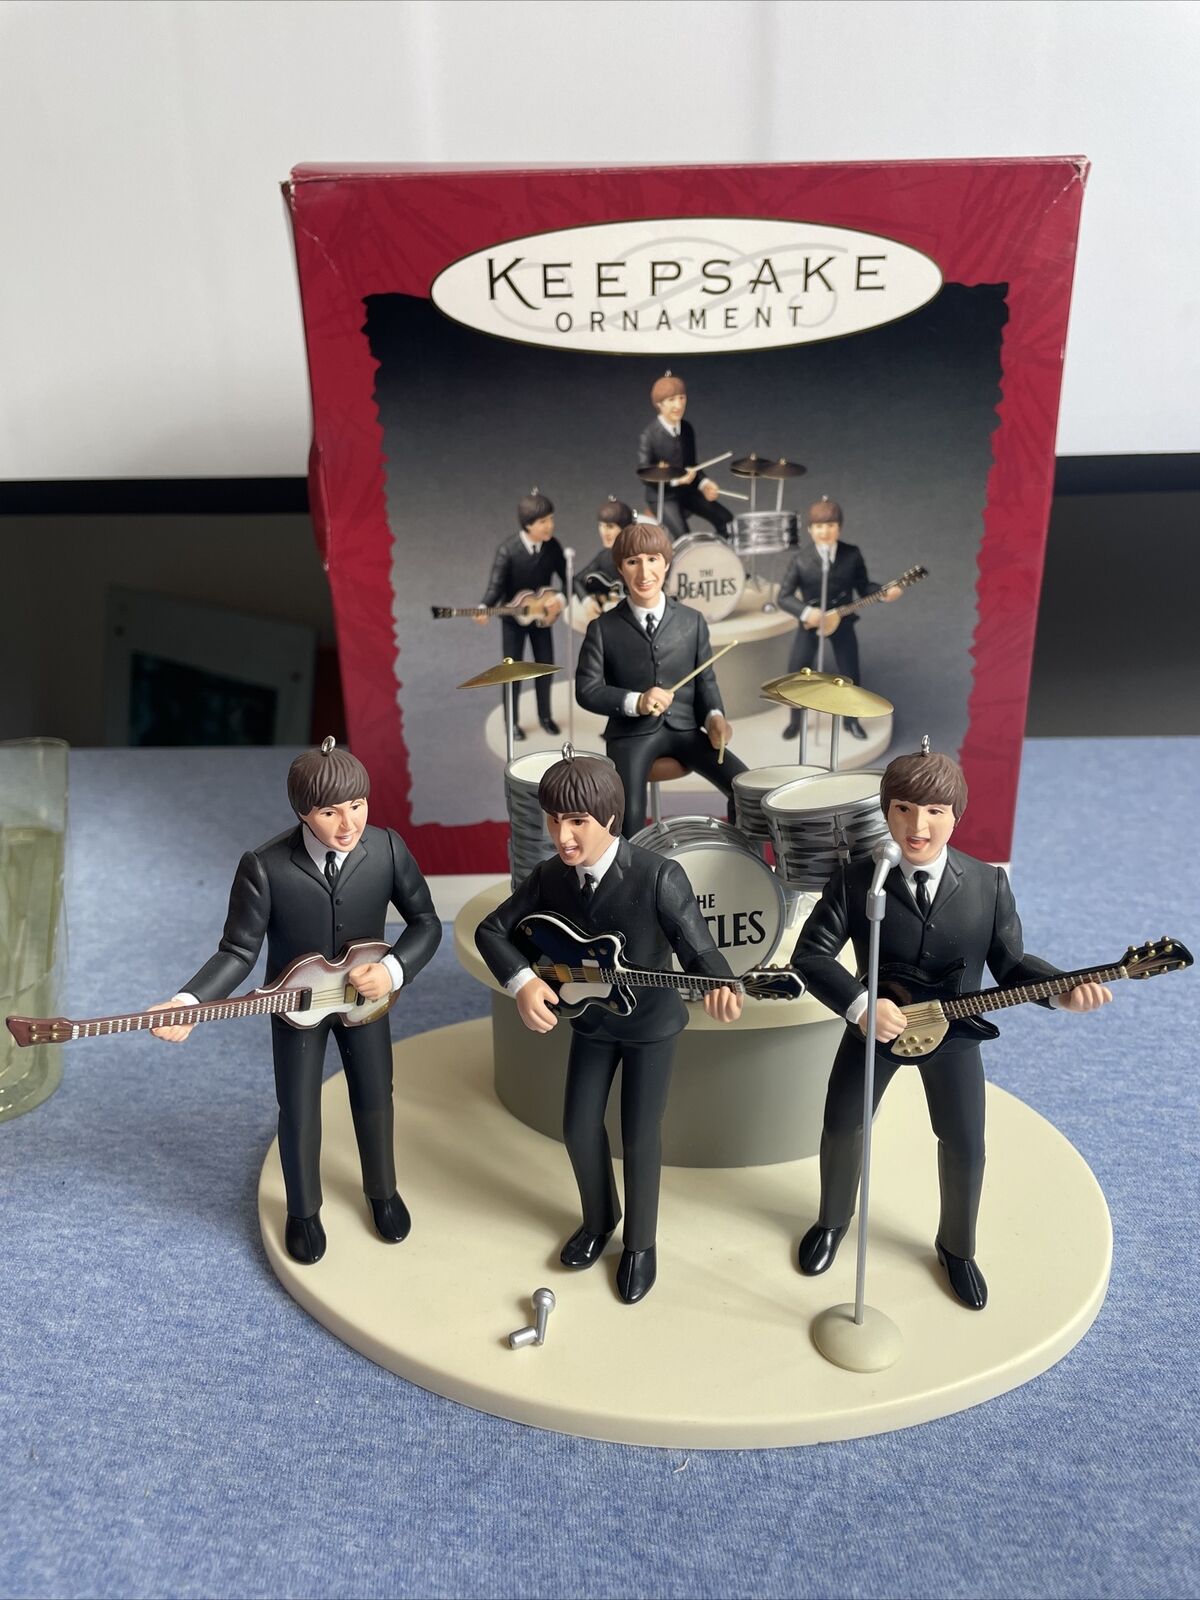 1994 Hallmark Keepsake The Beatles Gift Set Of 5 Ornaments In Perfect Condition